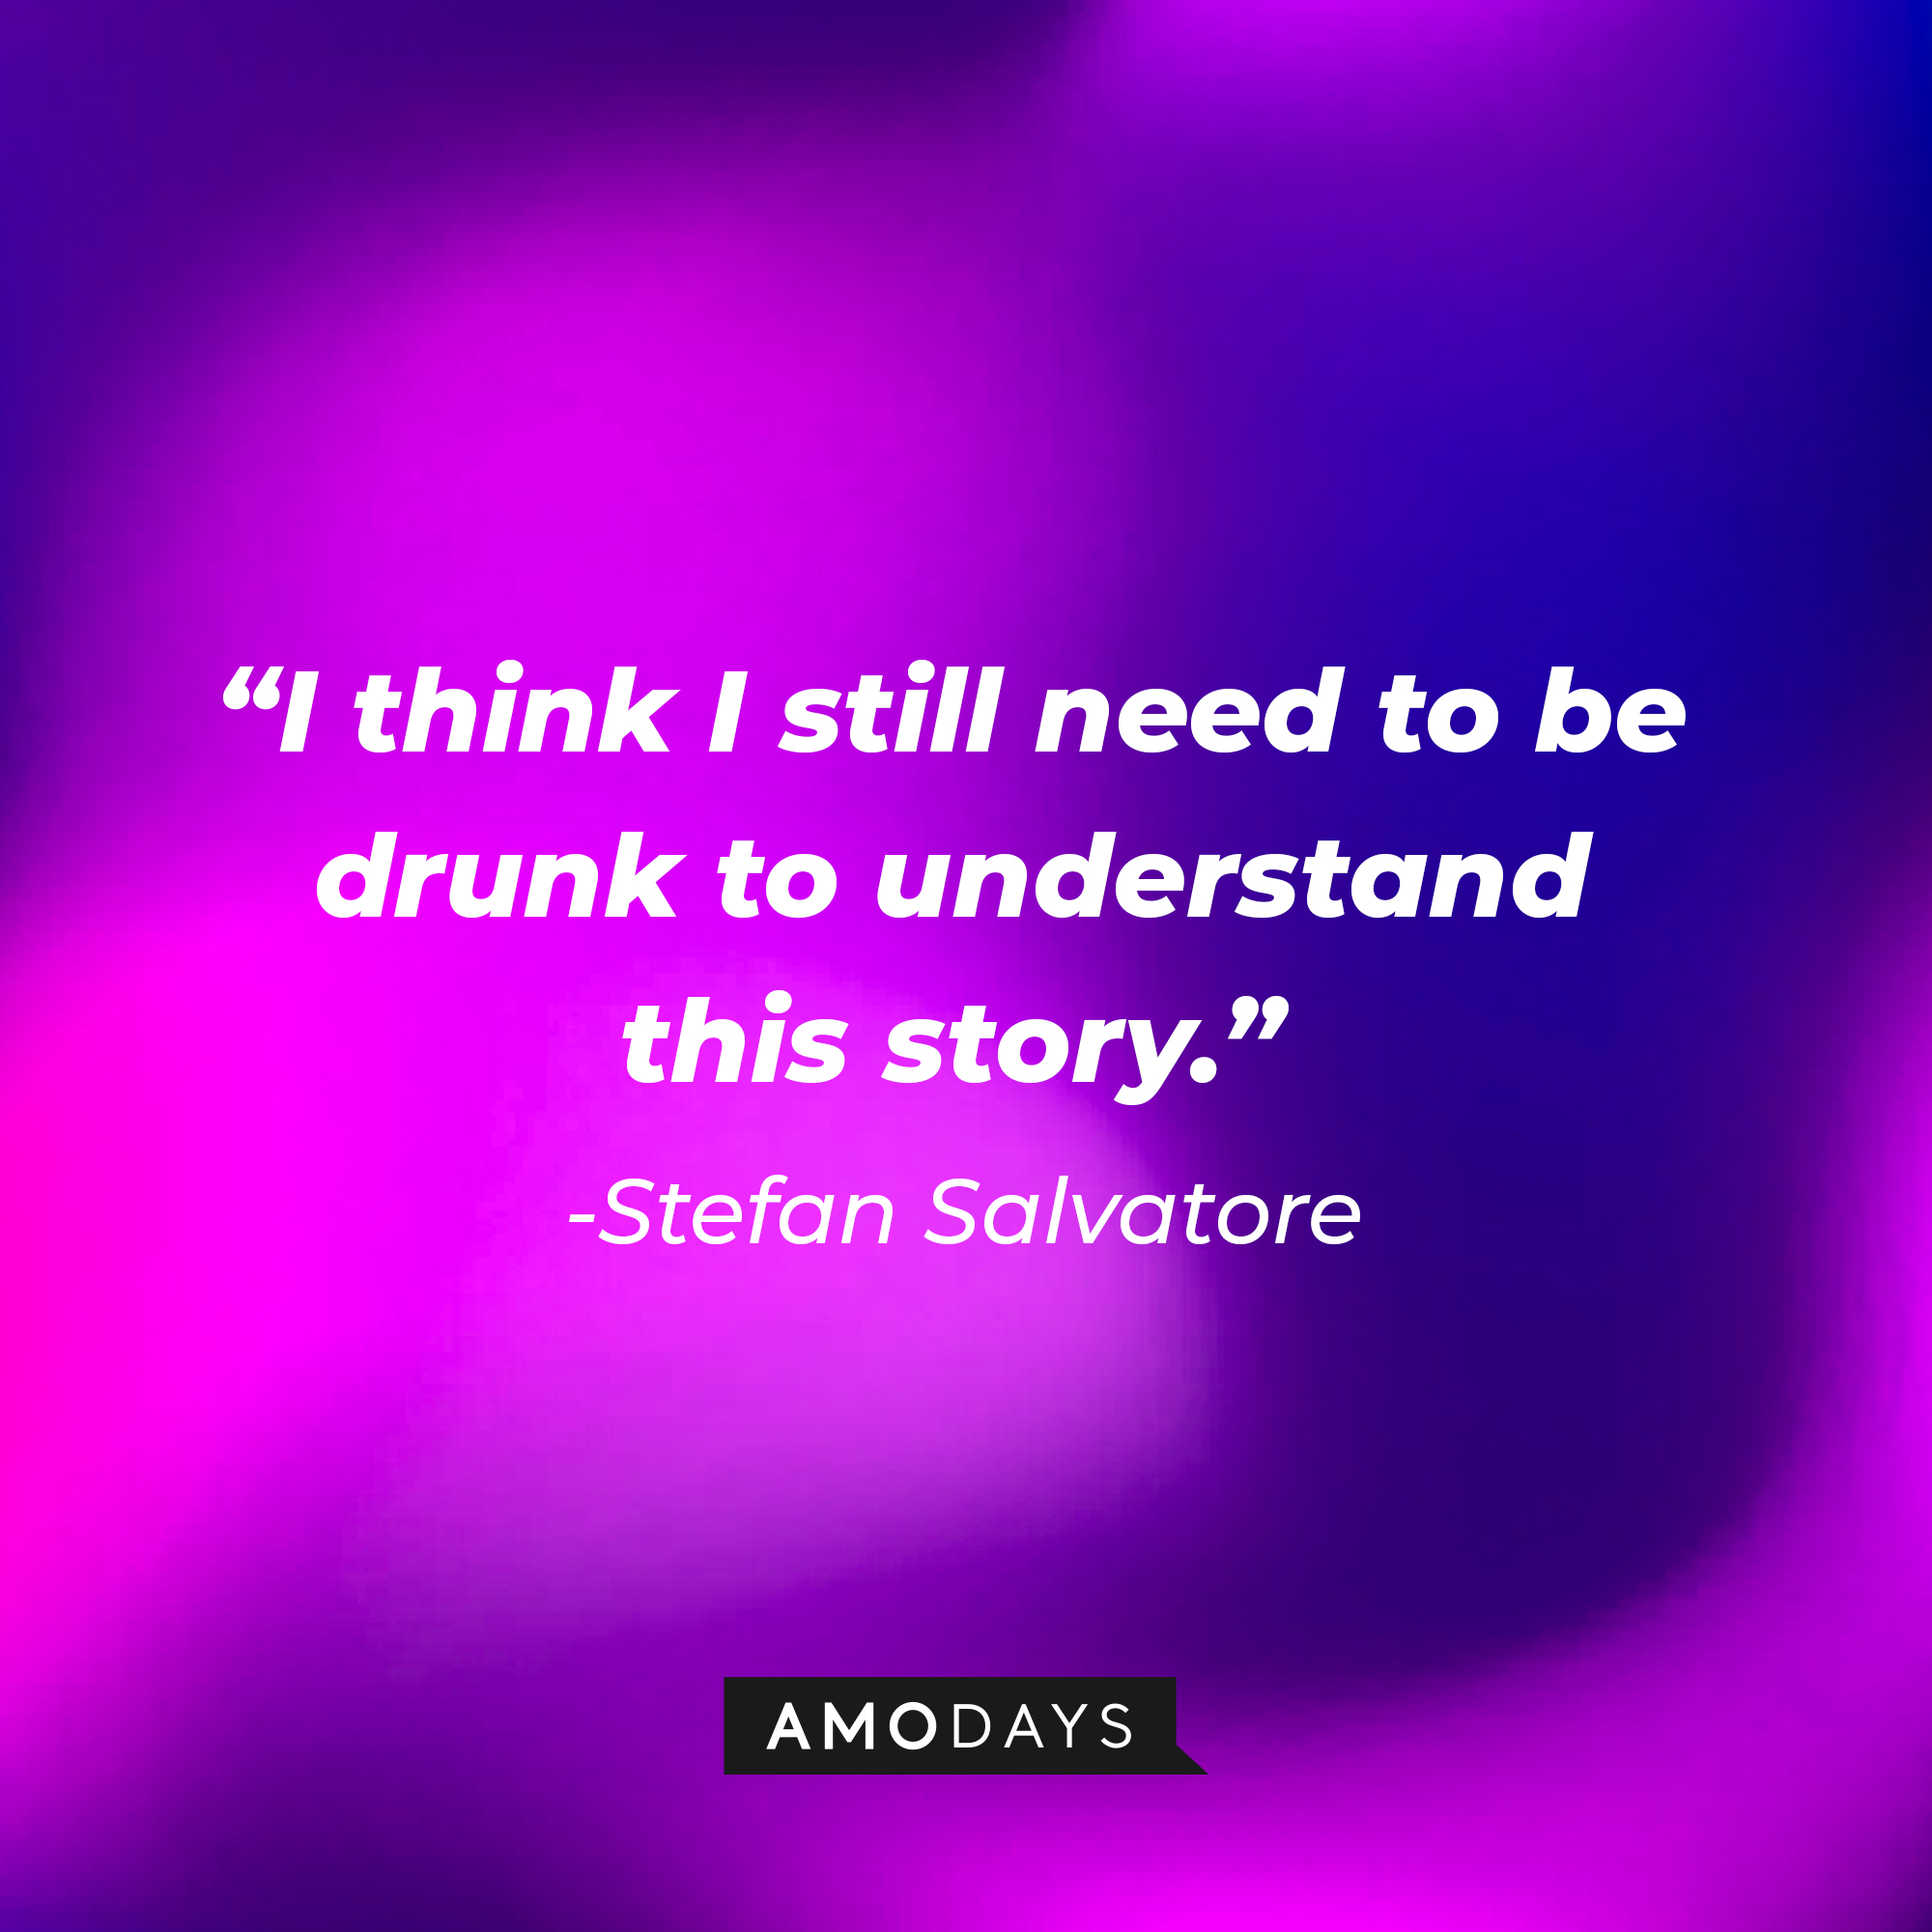 Stefan Salvatore's quote: "I think I still need to be drunk to understand this story." | Source: AmoDays